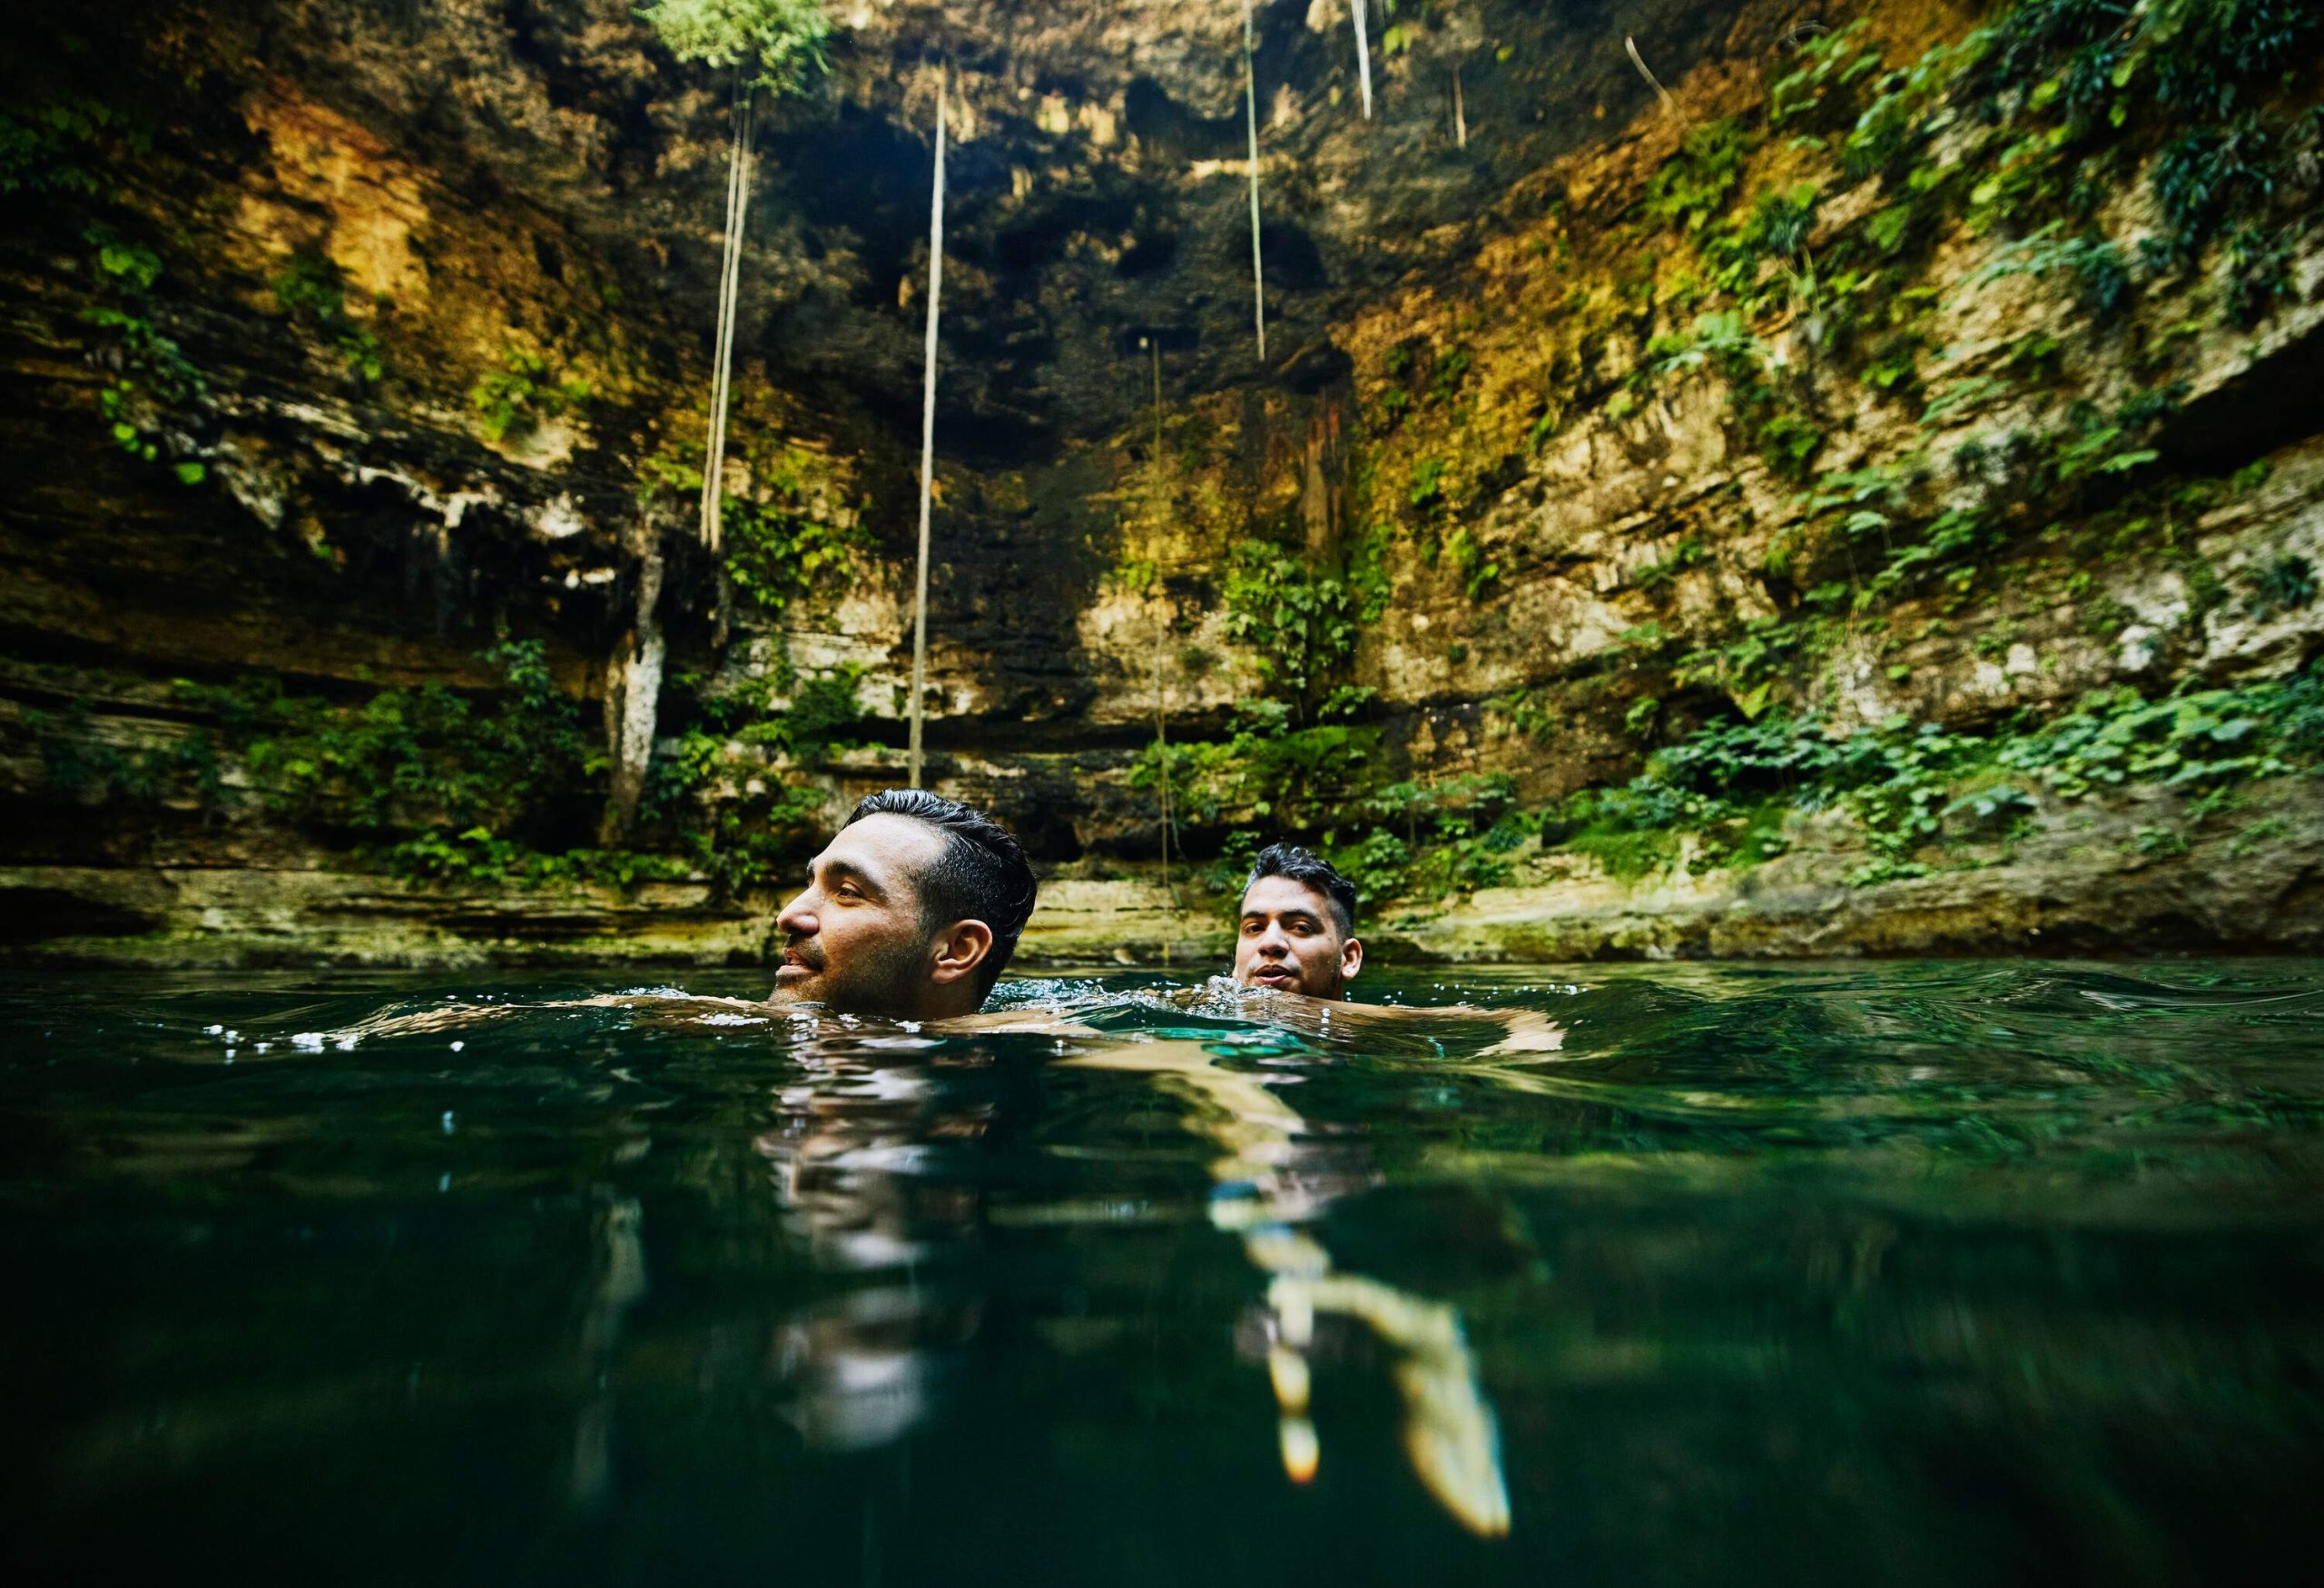 Two males submerged in the waters of a natural cave.